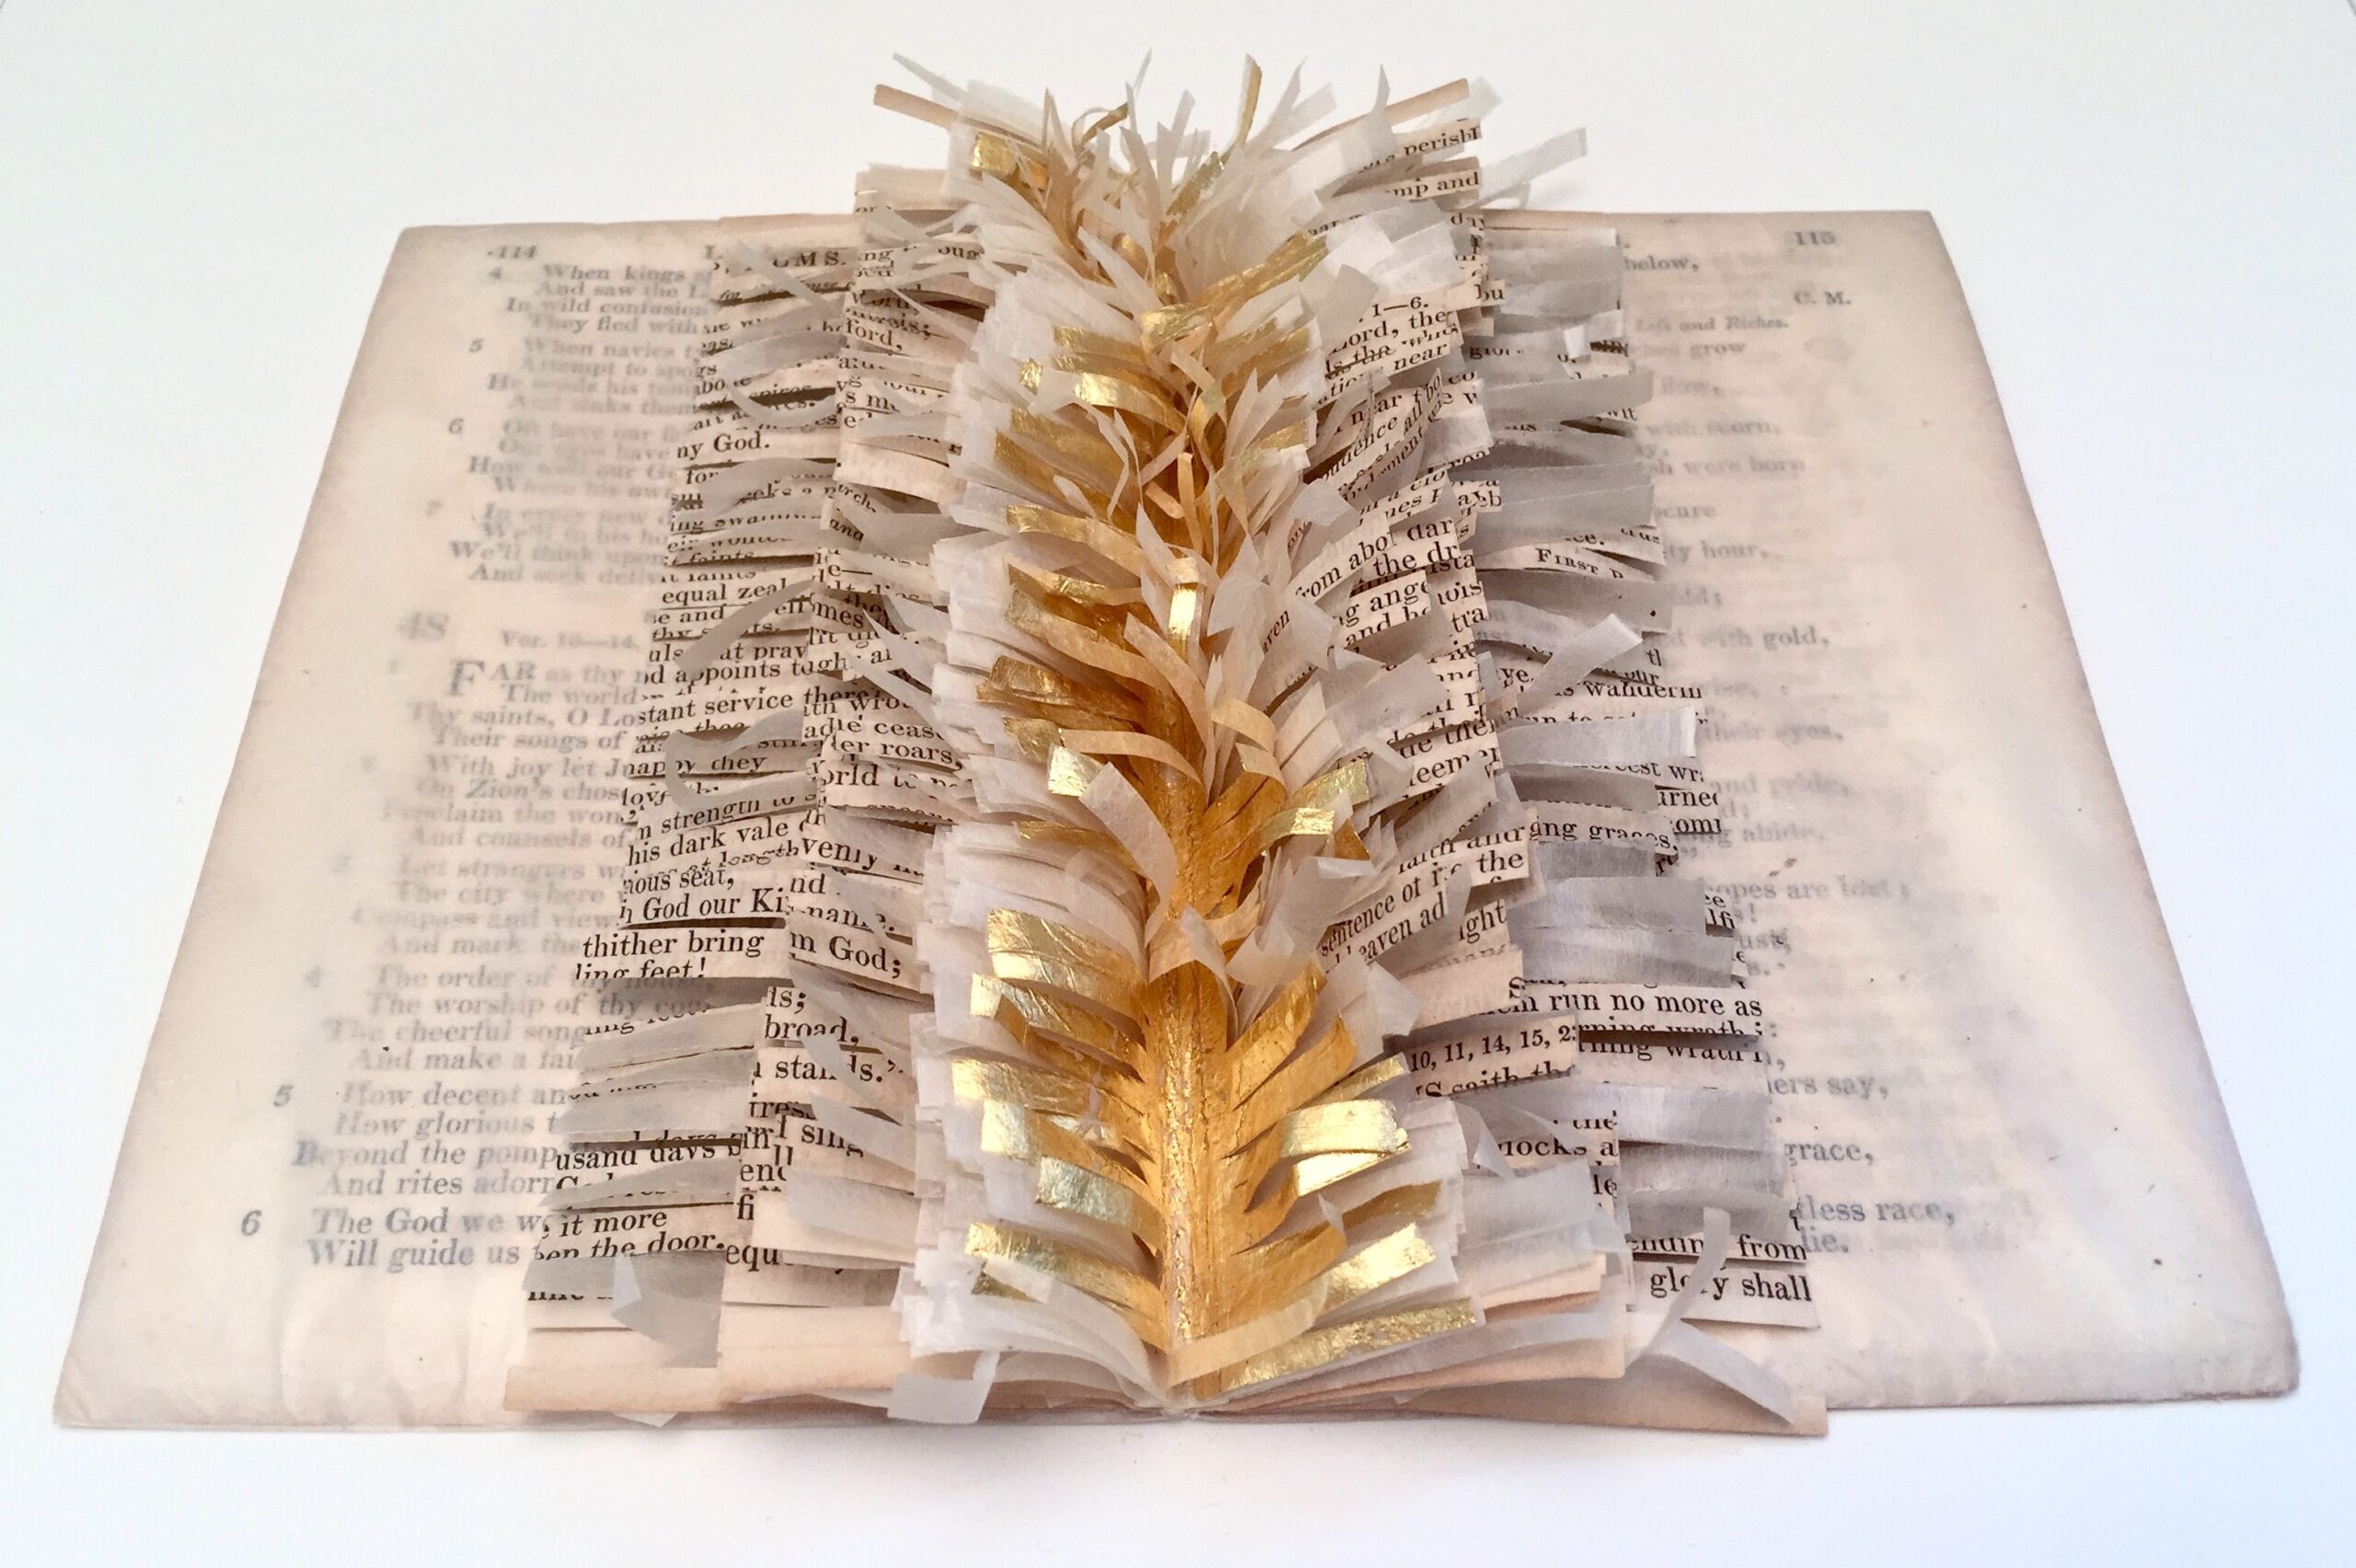 Sacred Poem XXIII, gold leaf, gampi tissue, thread, paper - pages Parish Psalmody dated 1844, 6 x 7.75 x 1.75in., 2017